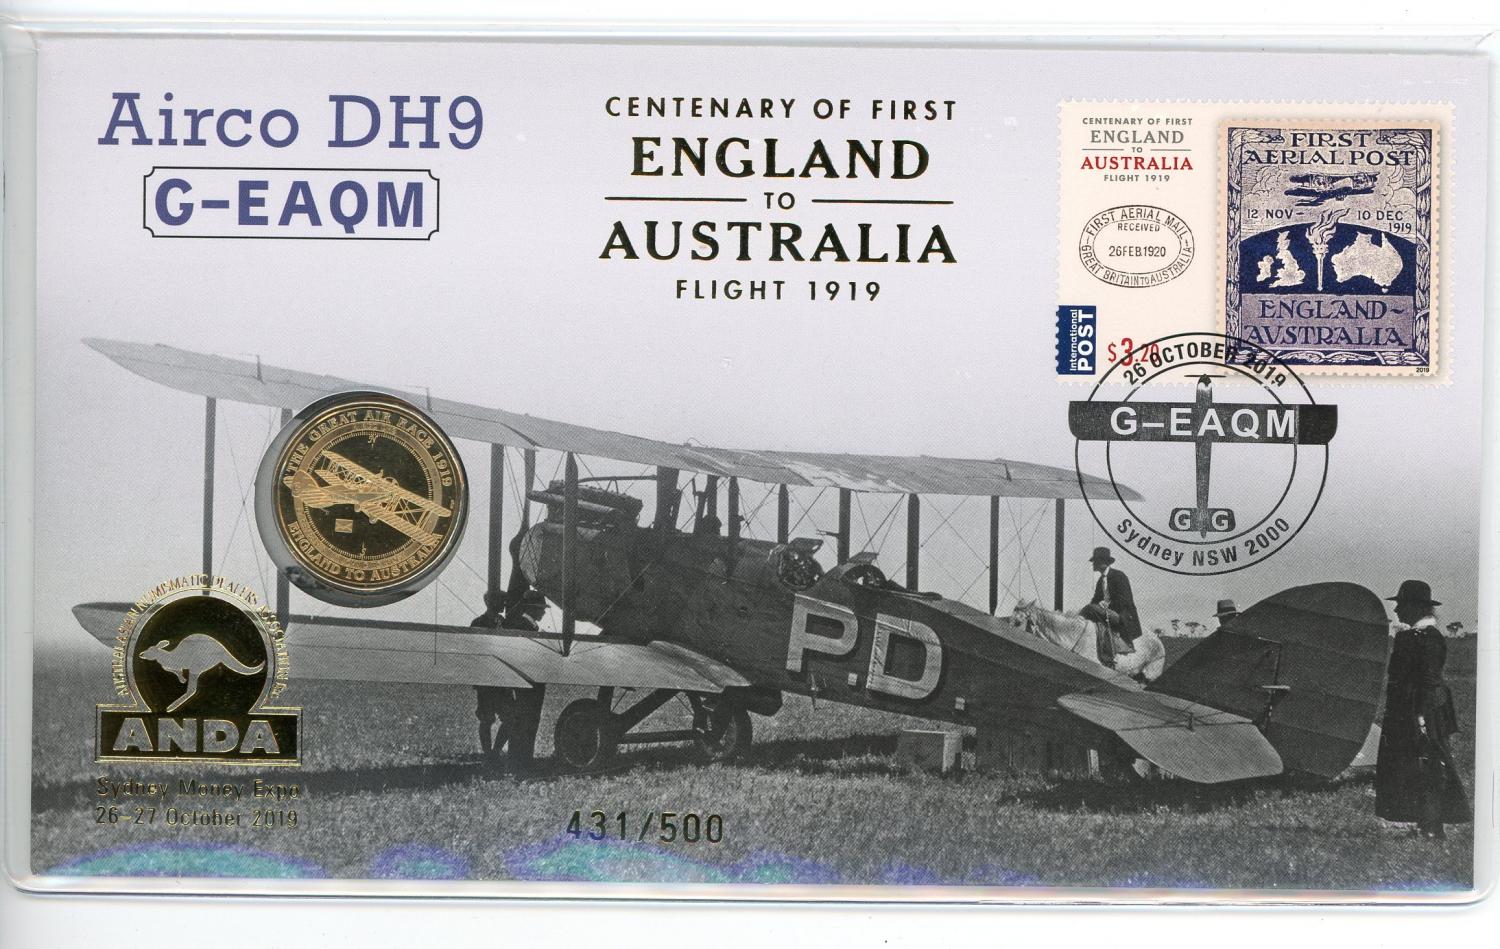 Thumbnail for 2019 Centenary of First England to Australia Flight 1919 Airco DH9 G-EAQM Sydney ANDA Money EXPO PNC